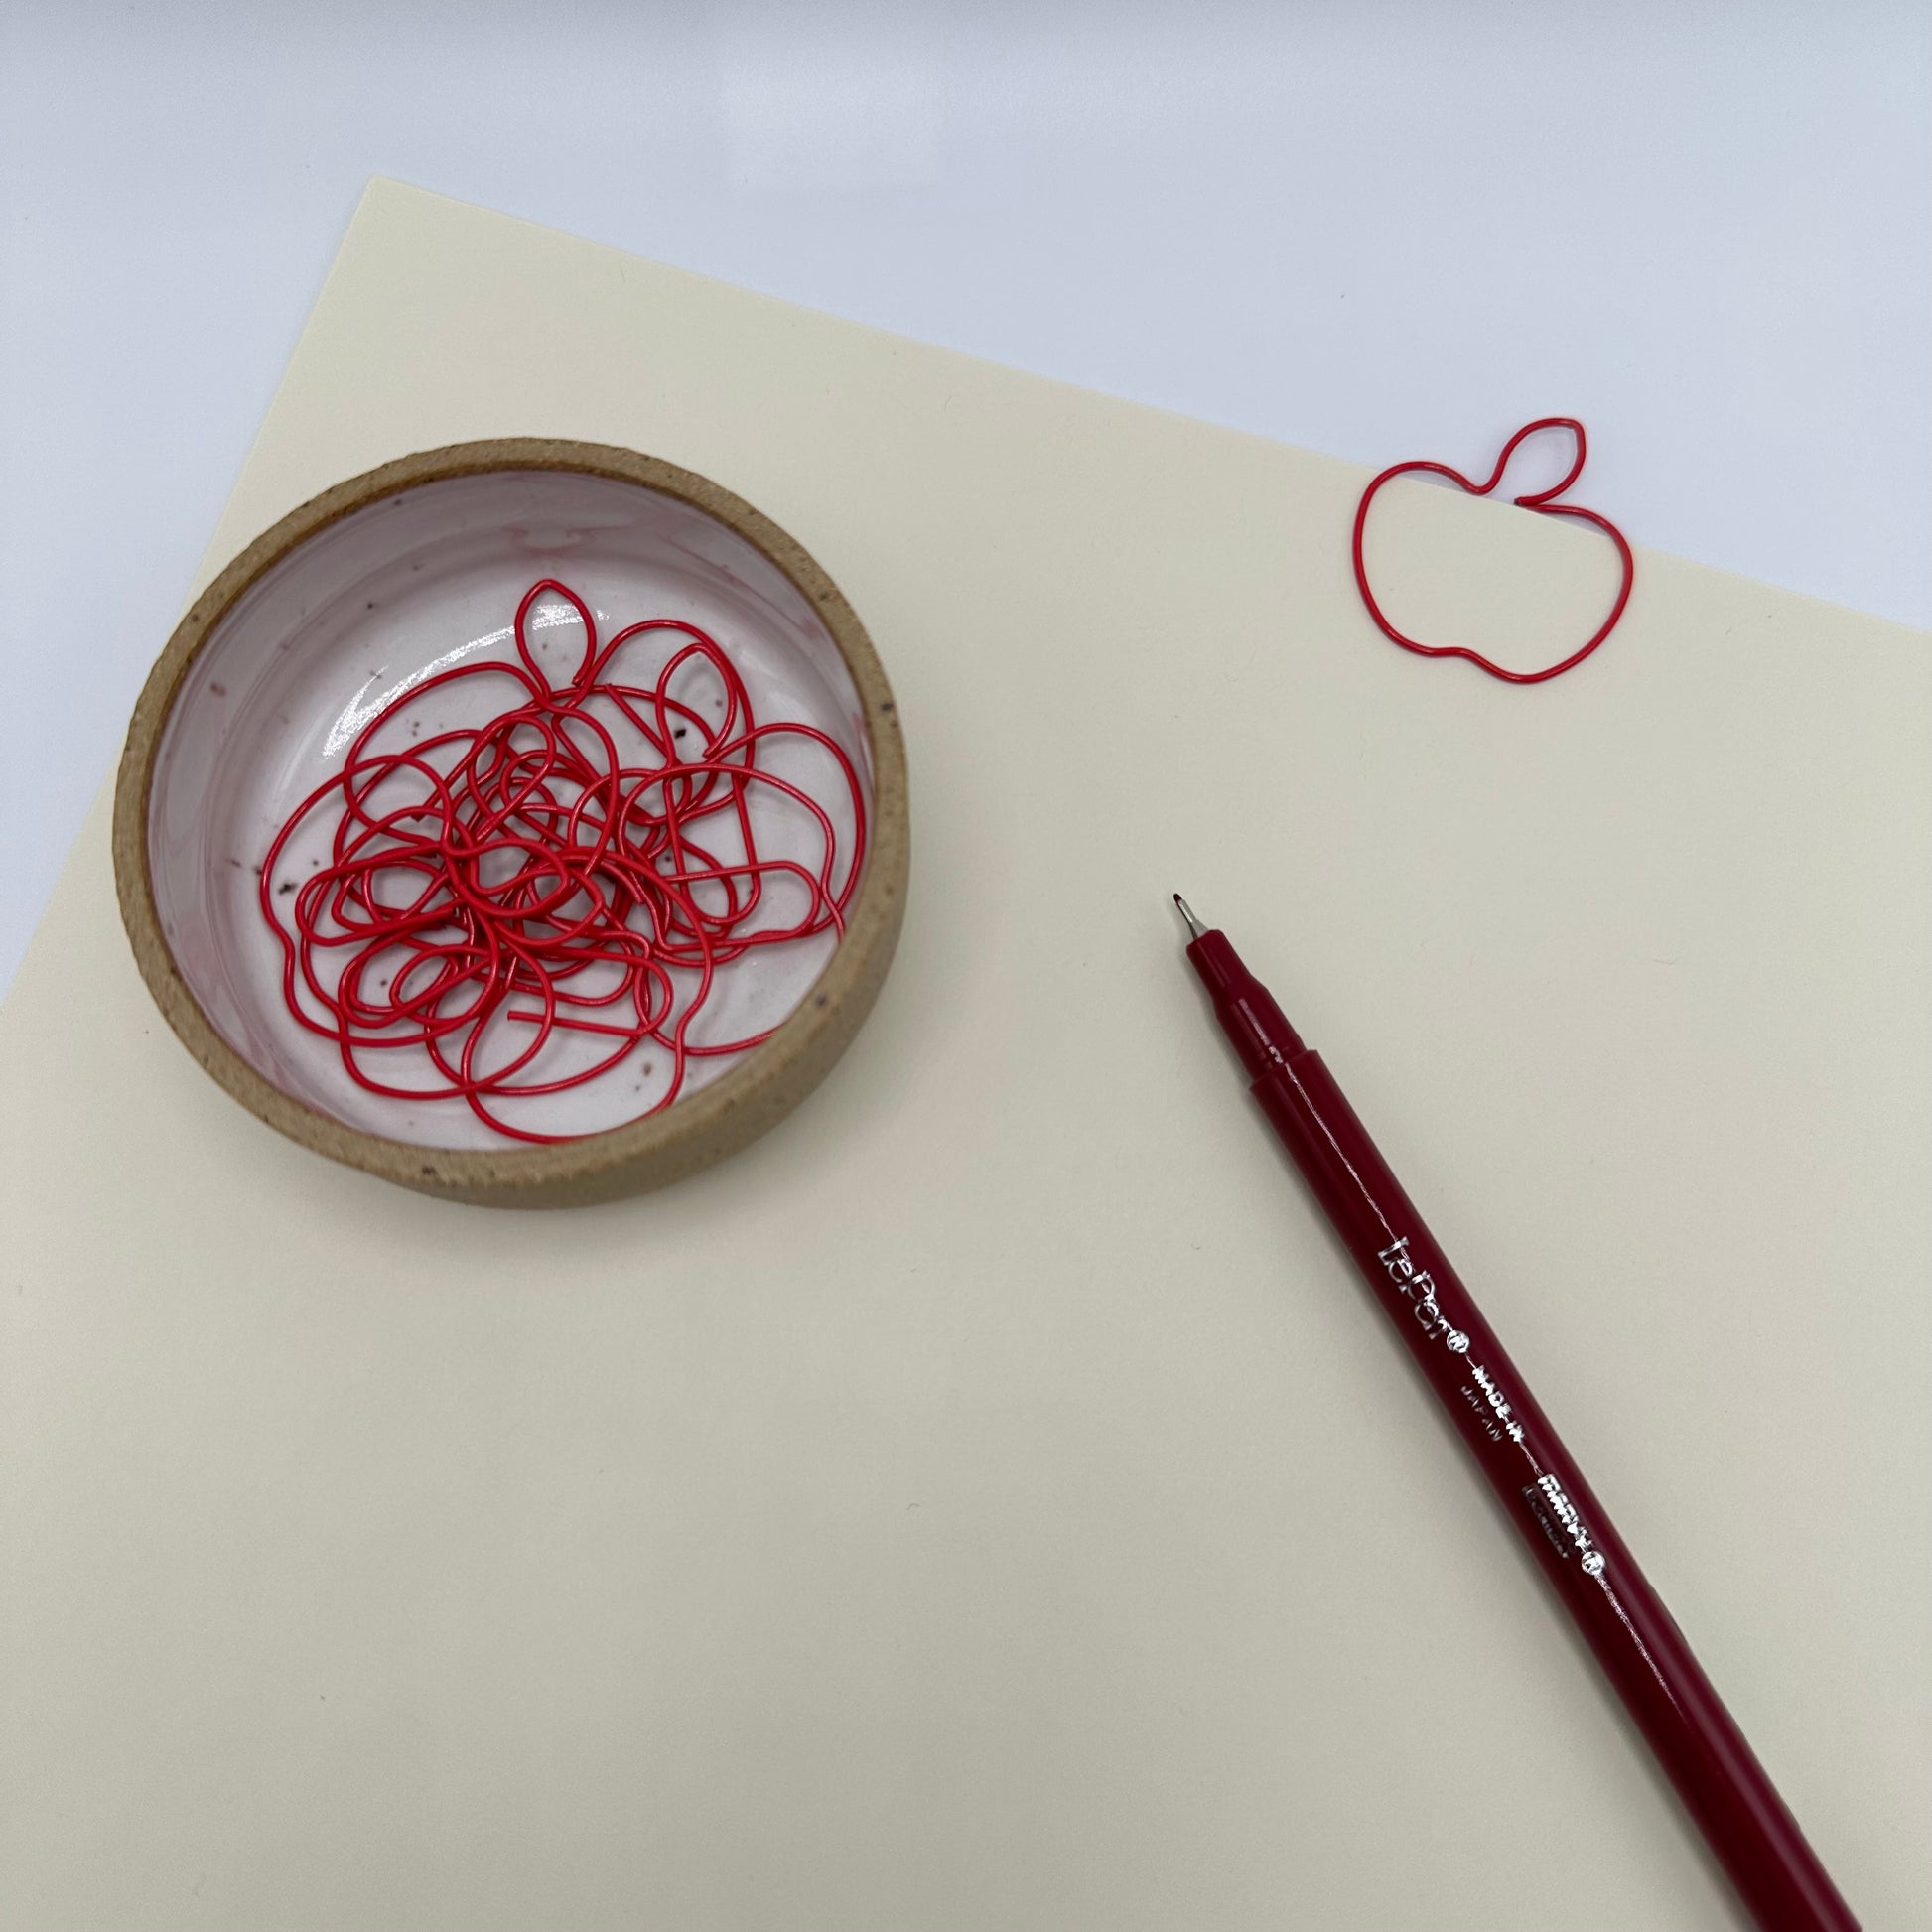 Staged Paperclips with paper, ramekin holding red apple paperclips, and burgundy Le Pen.